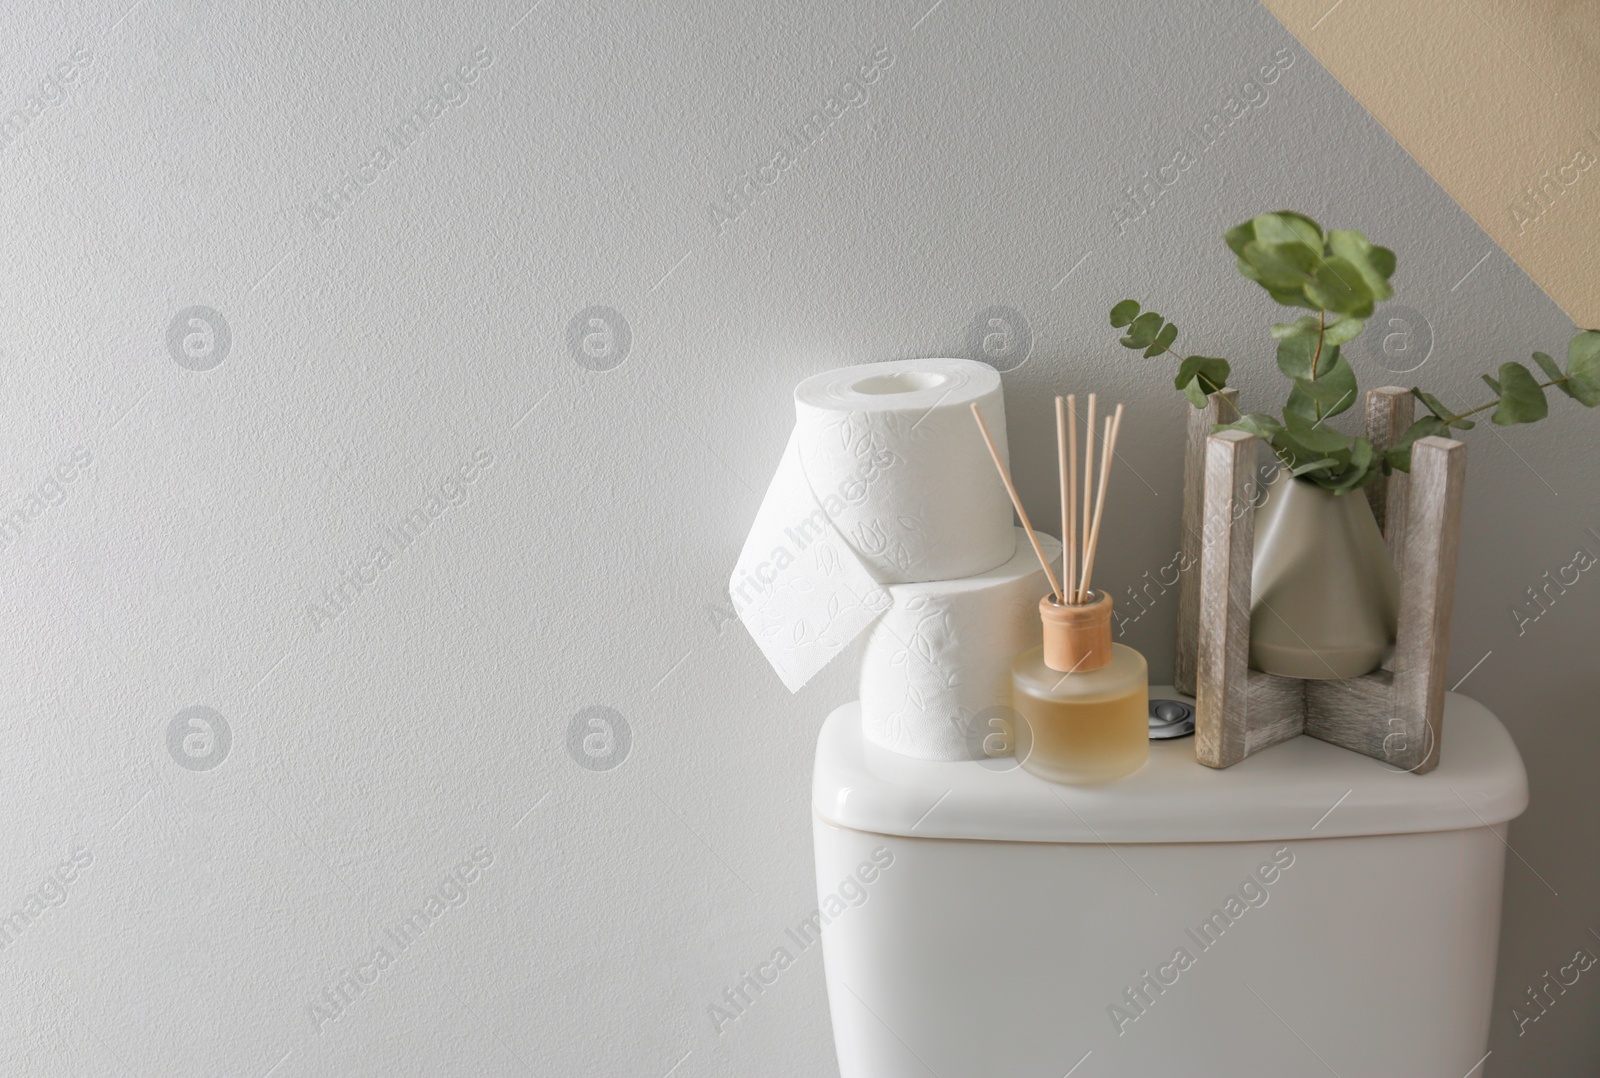 Photo of Decor elements and paper rolls on toilet tank near color wall, space for text. Bathroom interior